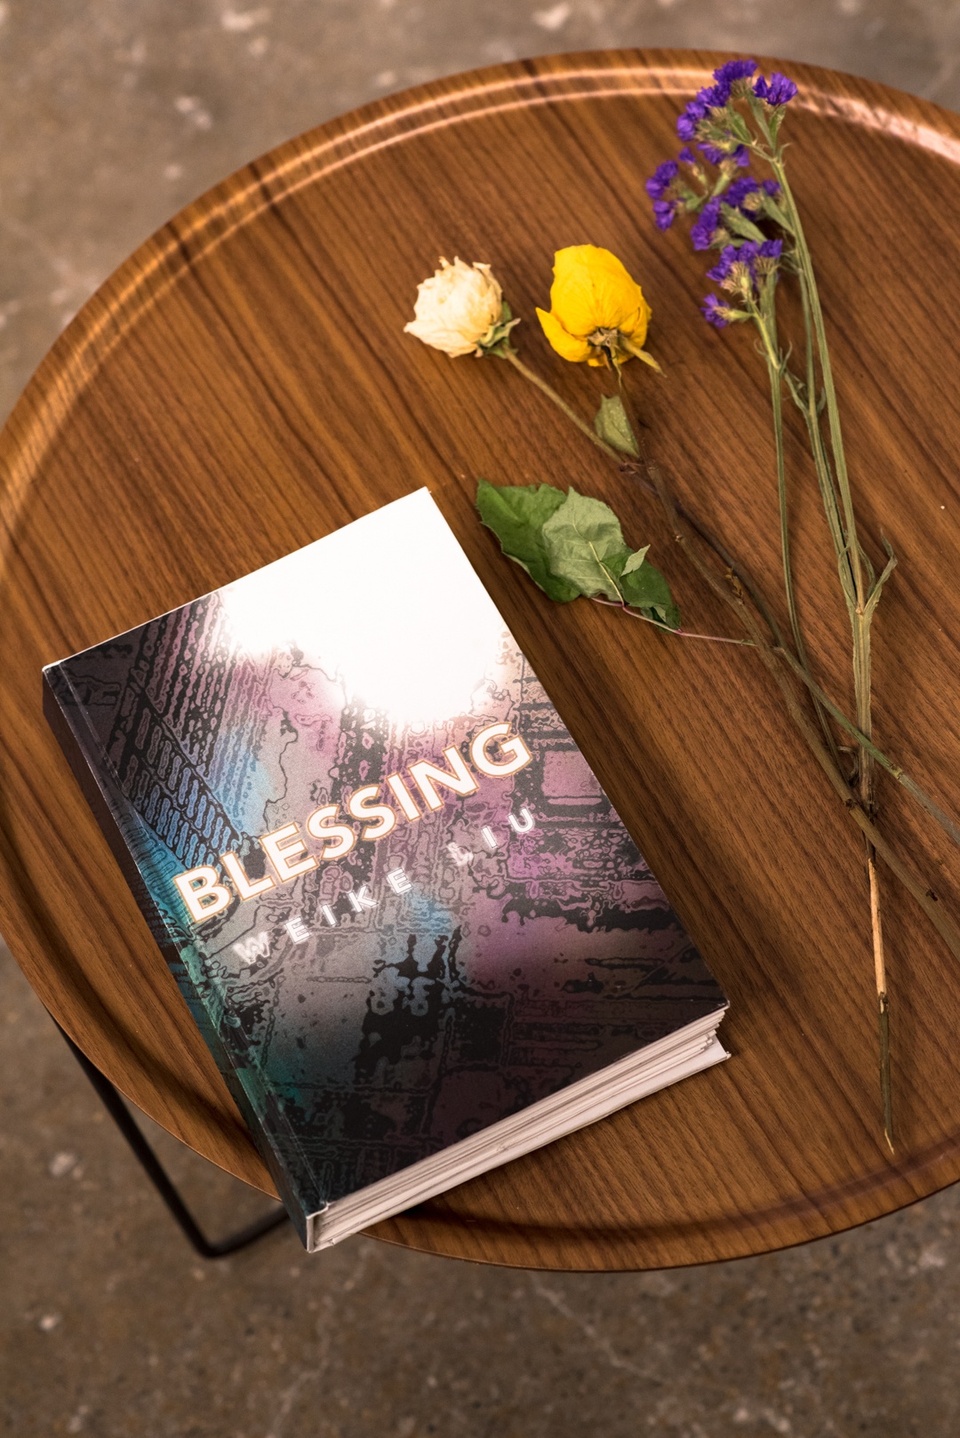 Overhead shot of a thick book on an end table decorated with dried flowers. The cover is an abstact drawing in black, blue, and purple and is titled "Blessing."